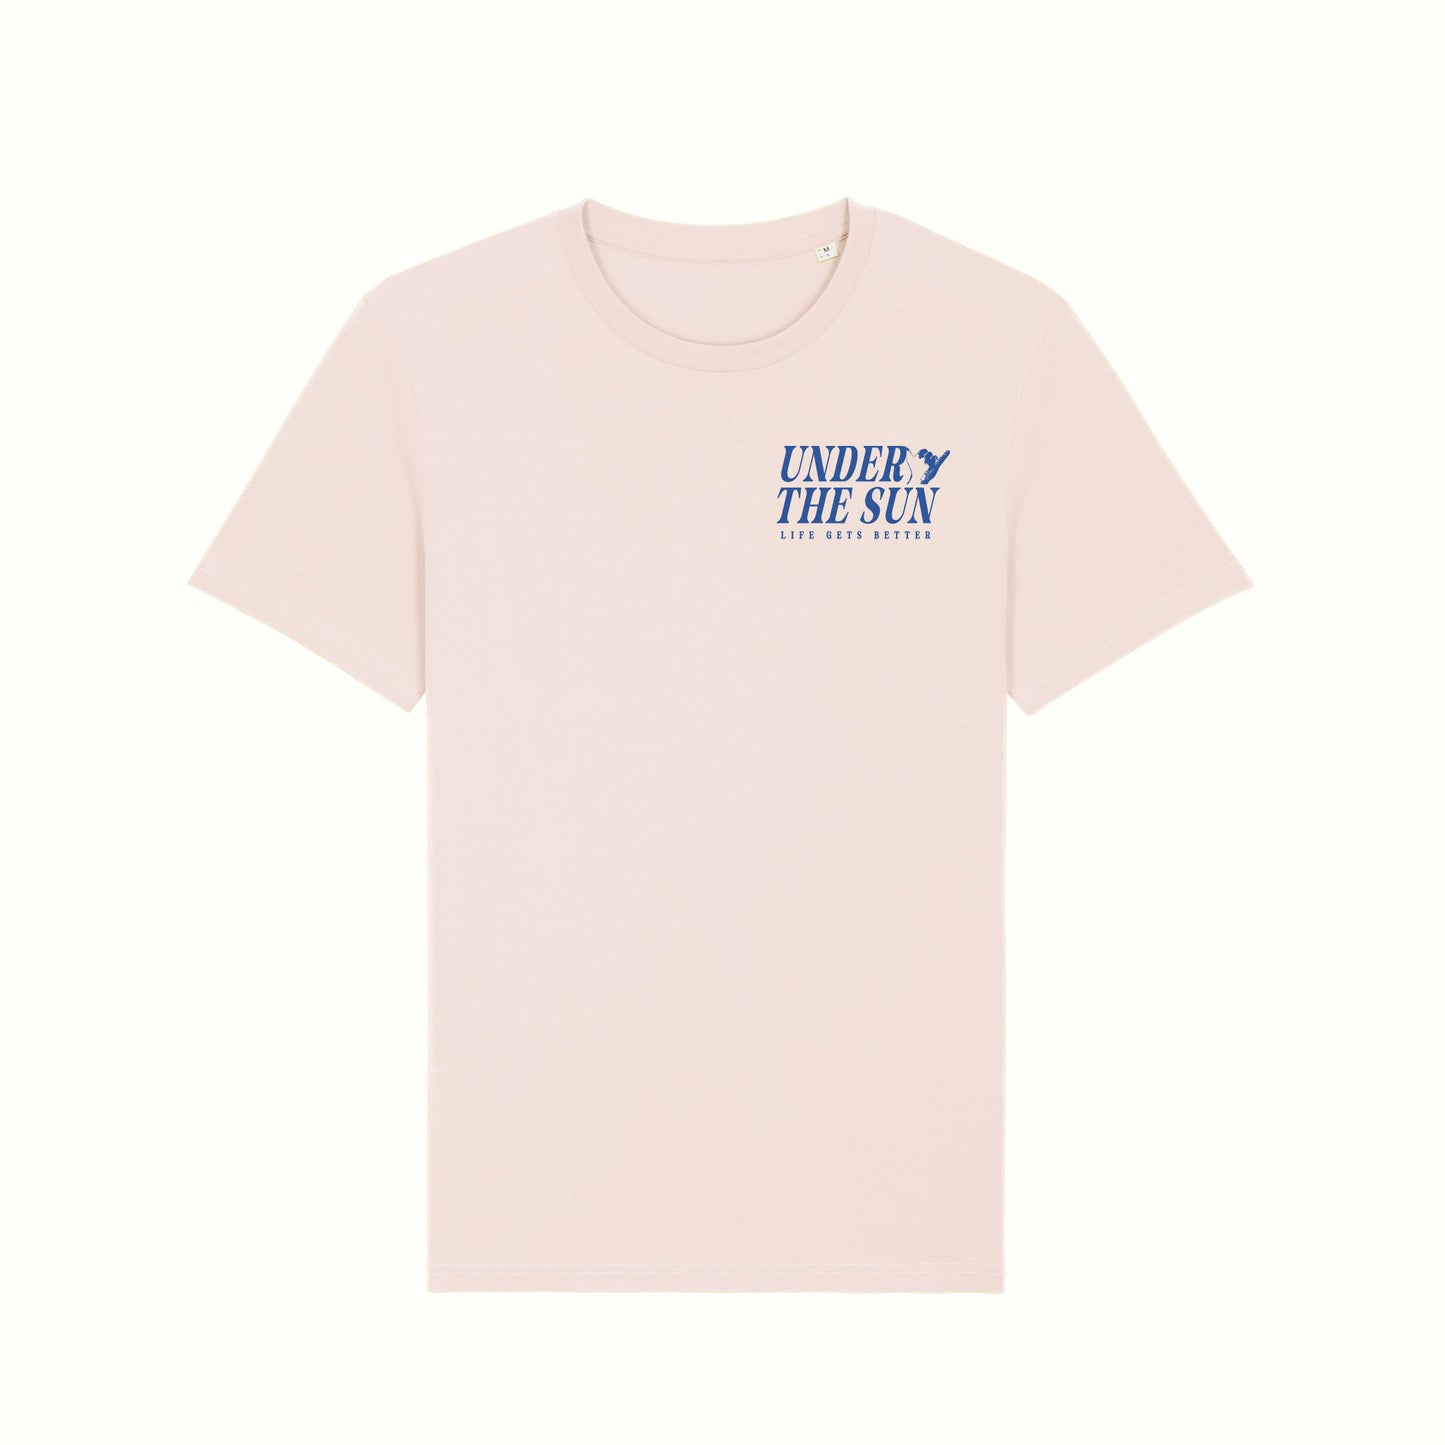 Fear The Ordinary candy pink premium organic cotton t-shirt with blue cobalt under the sun summer inspired front print.